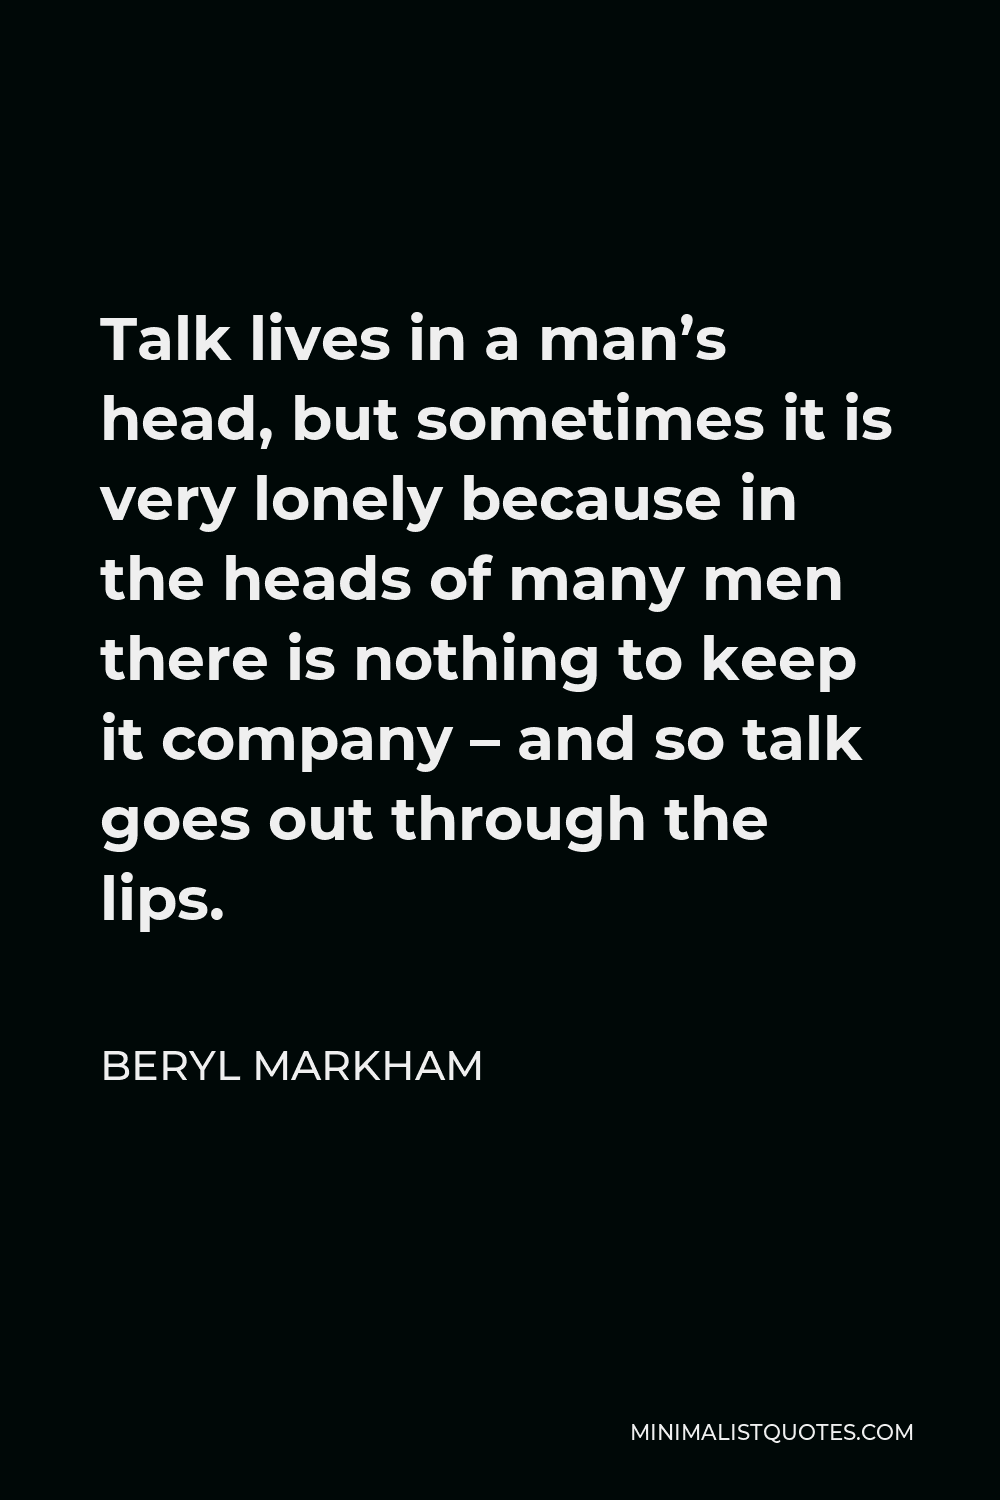 Beryl Markham Quote - Talk lives in a man’s head, but sometimes it is very lonely because in the heads of many men there is nothing to keep it company – and so talk goes out through the lips.